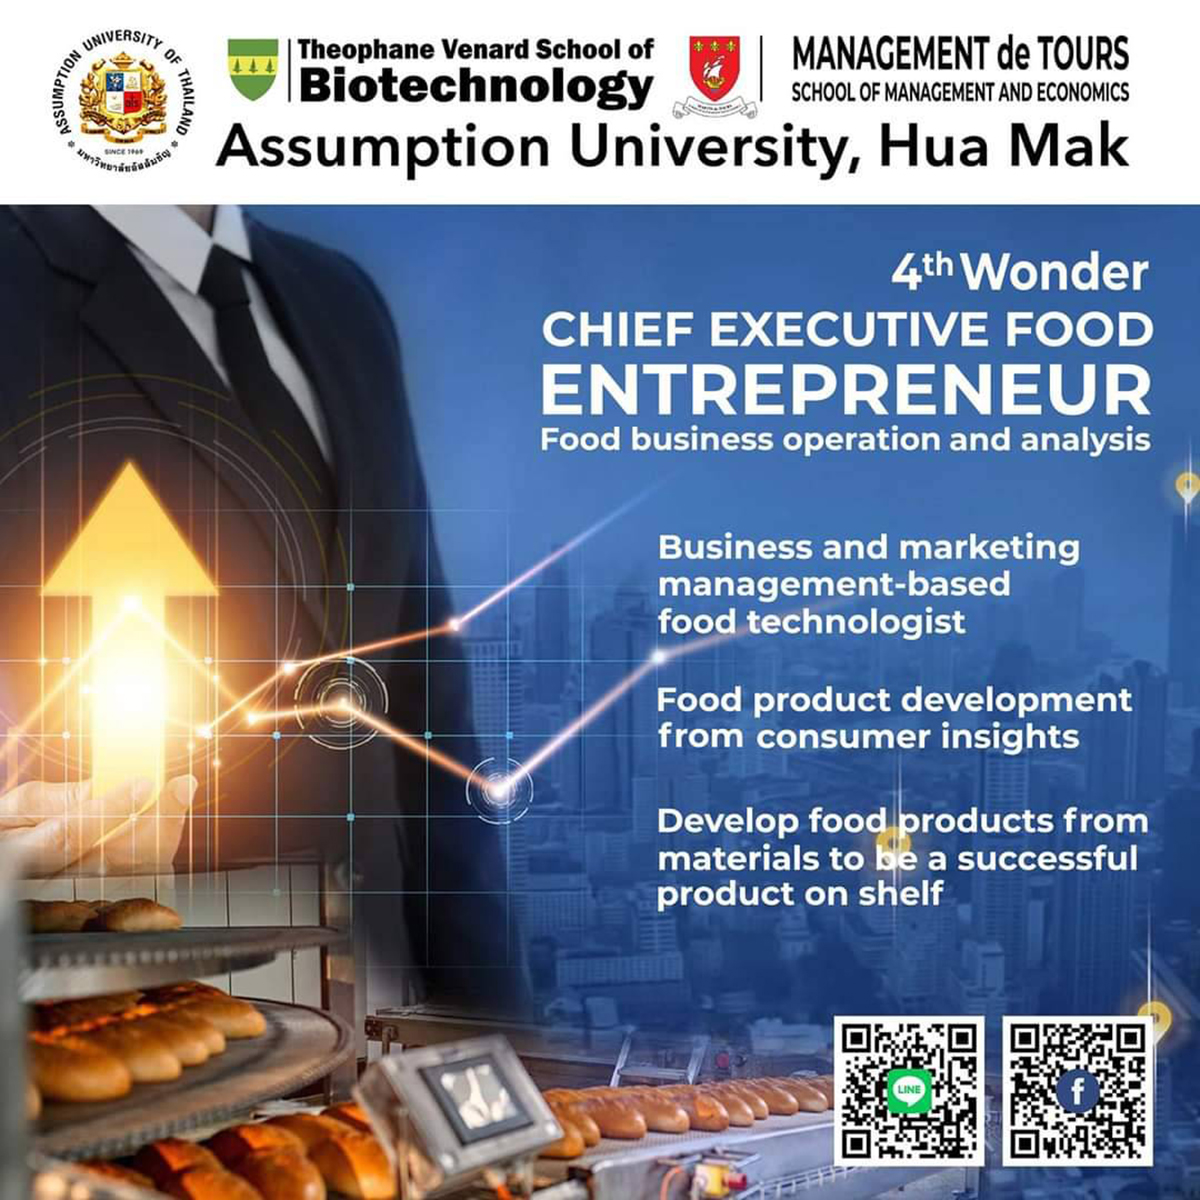 4th Wonder: Chief executive food entrepreneur – Food business operation and analysis